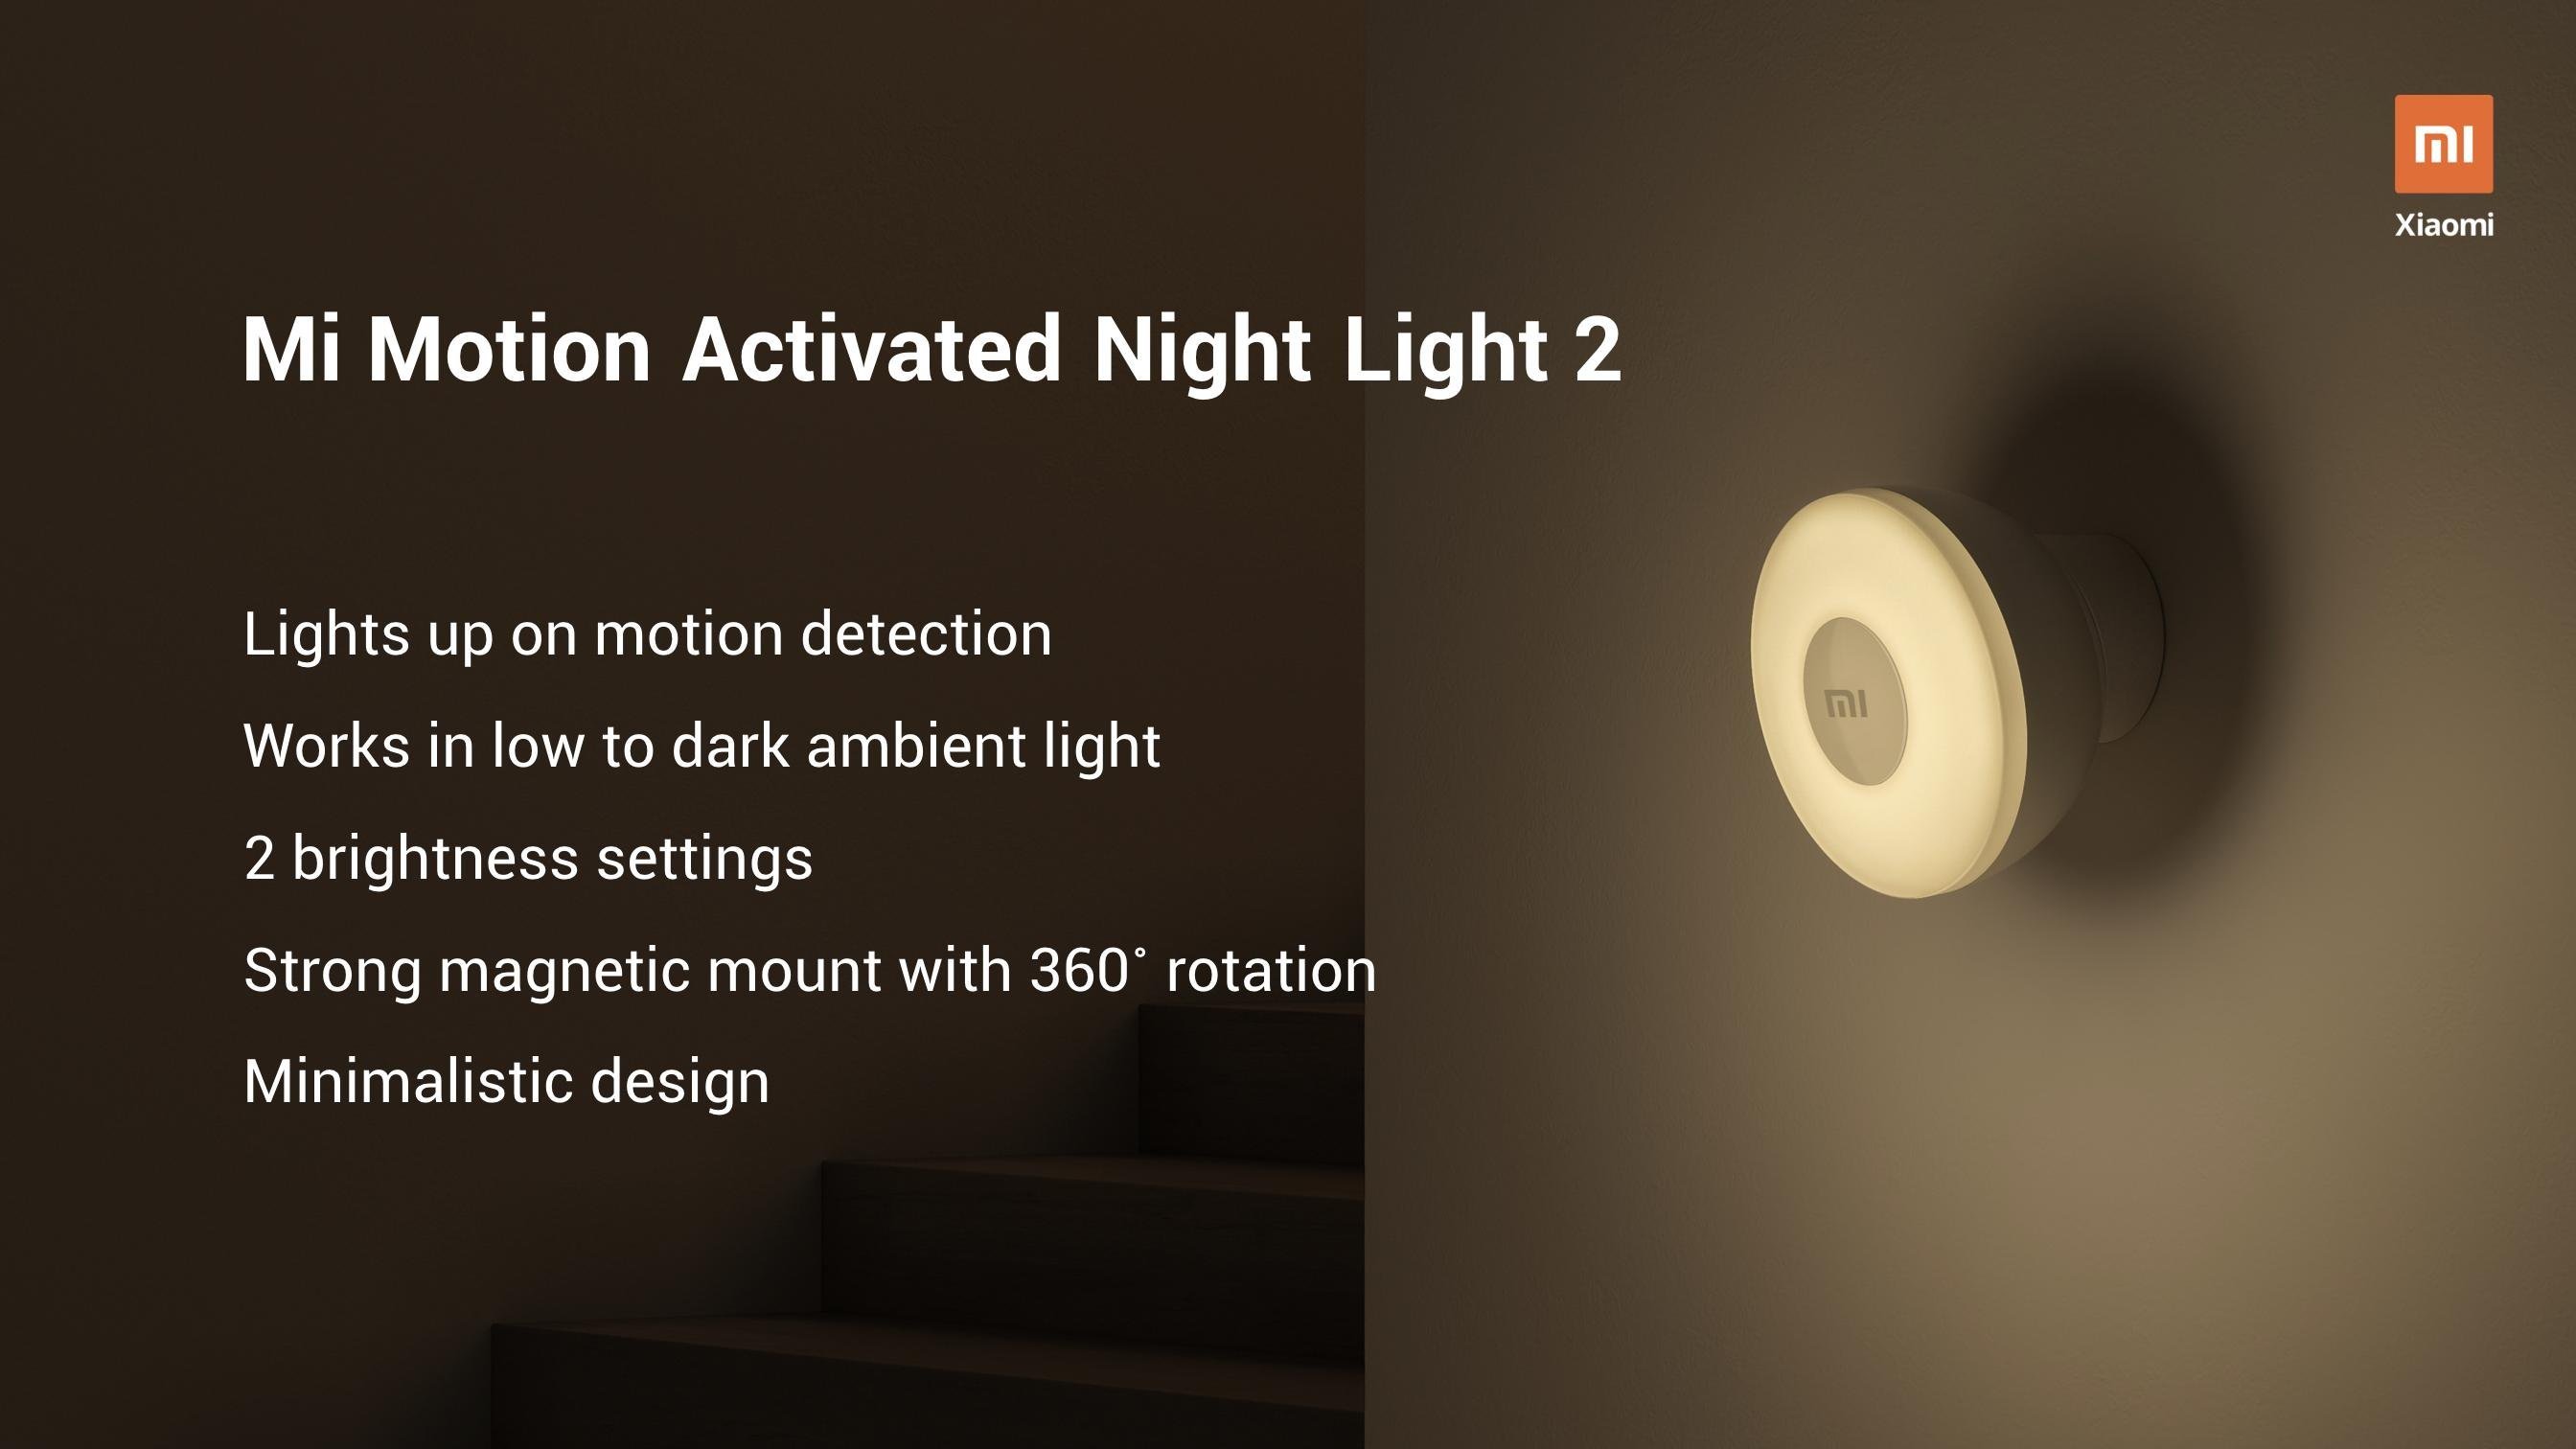 radiator Tilbud pizza Xiaomi launches Mi Motion Activated Night Light 2 in India - Gizmochina